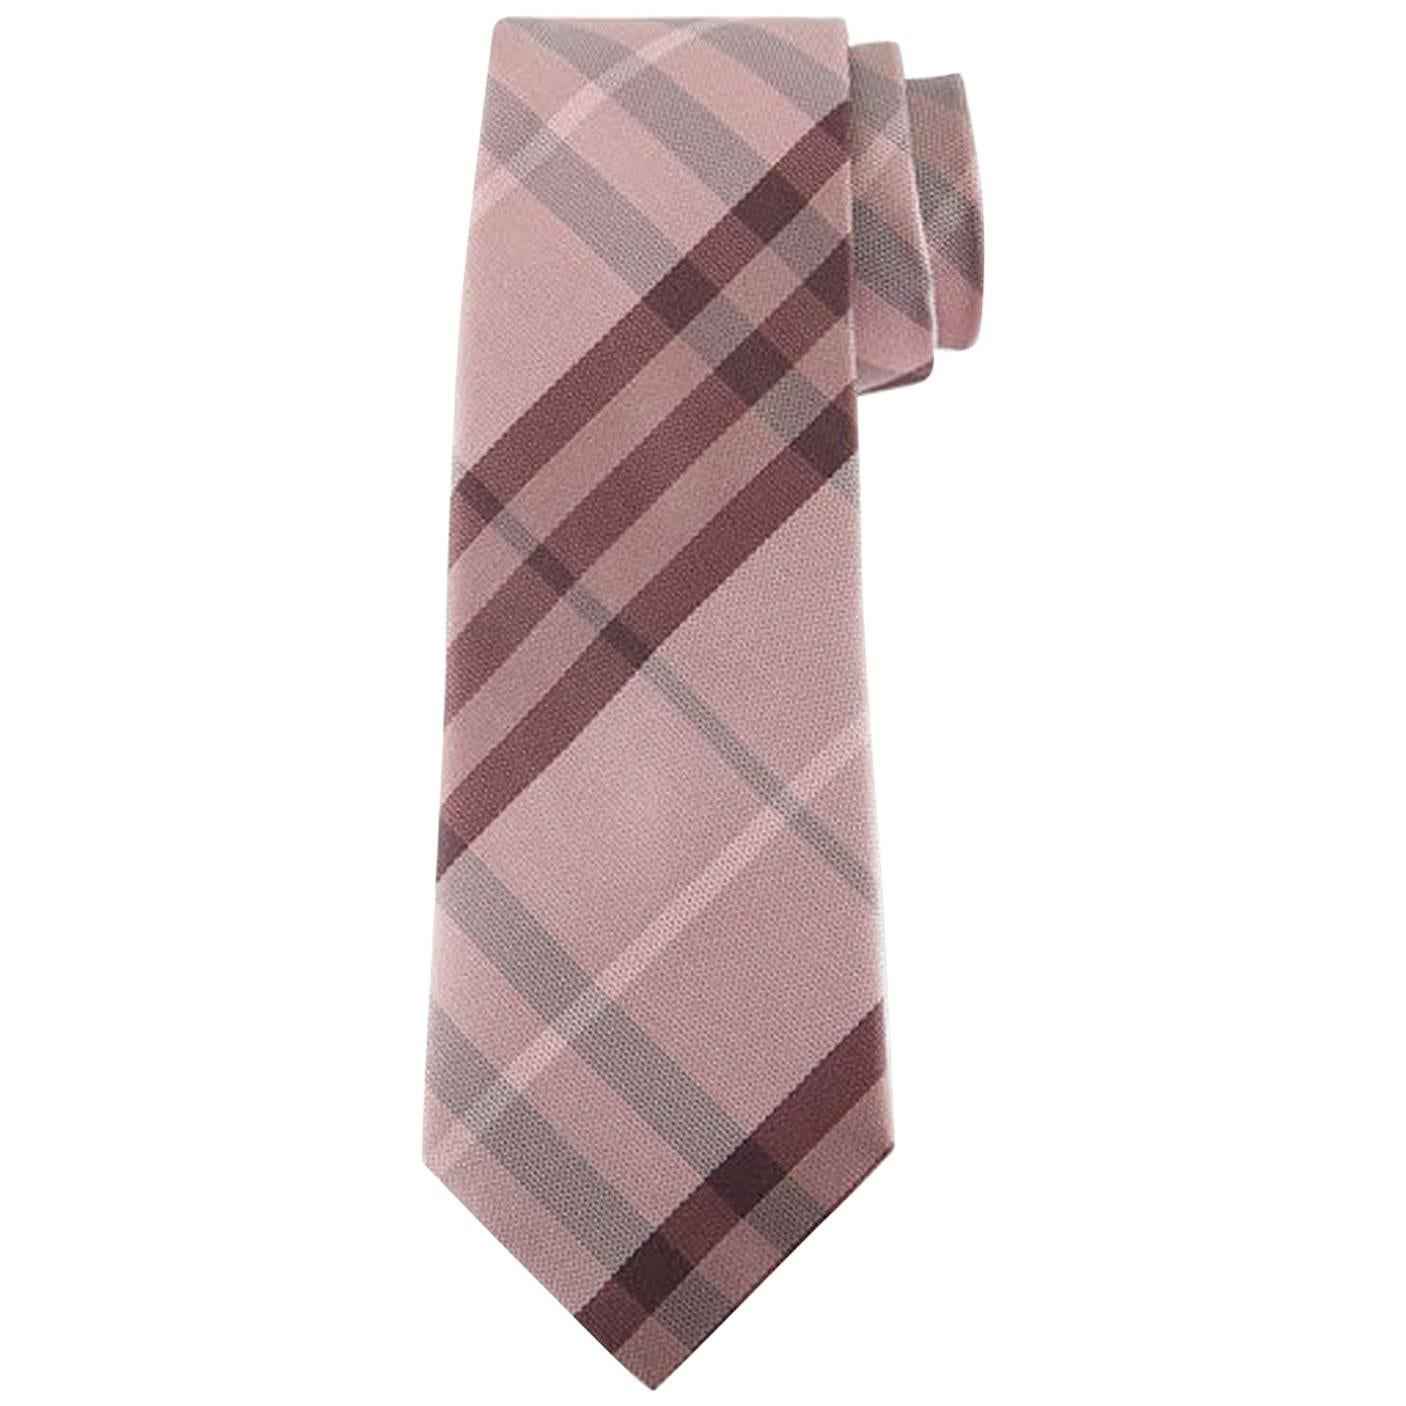 Burberry Texture Check Silk Pink Tie - Size: 3” (8cm)